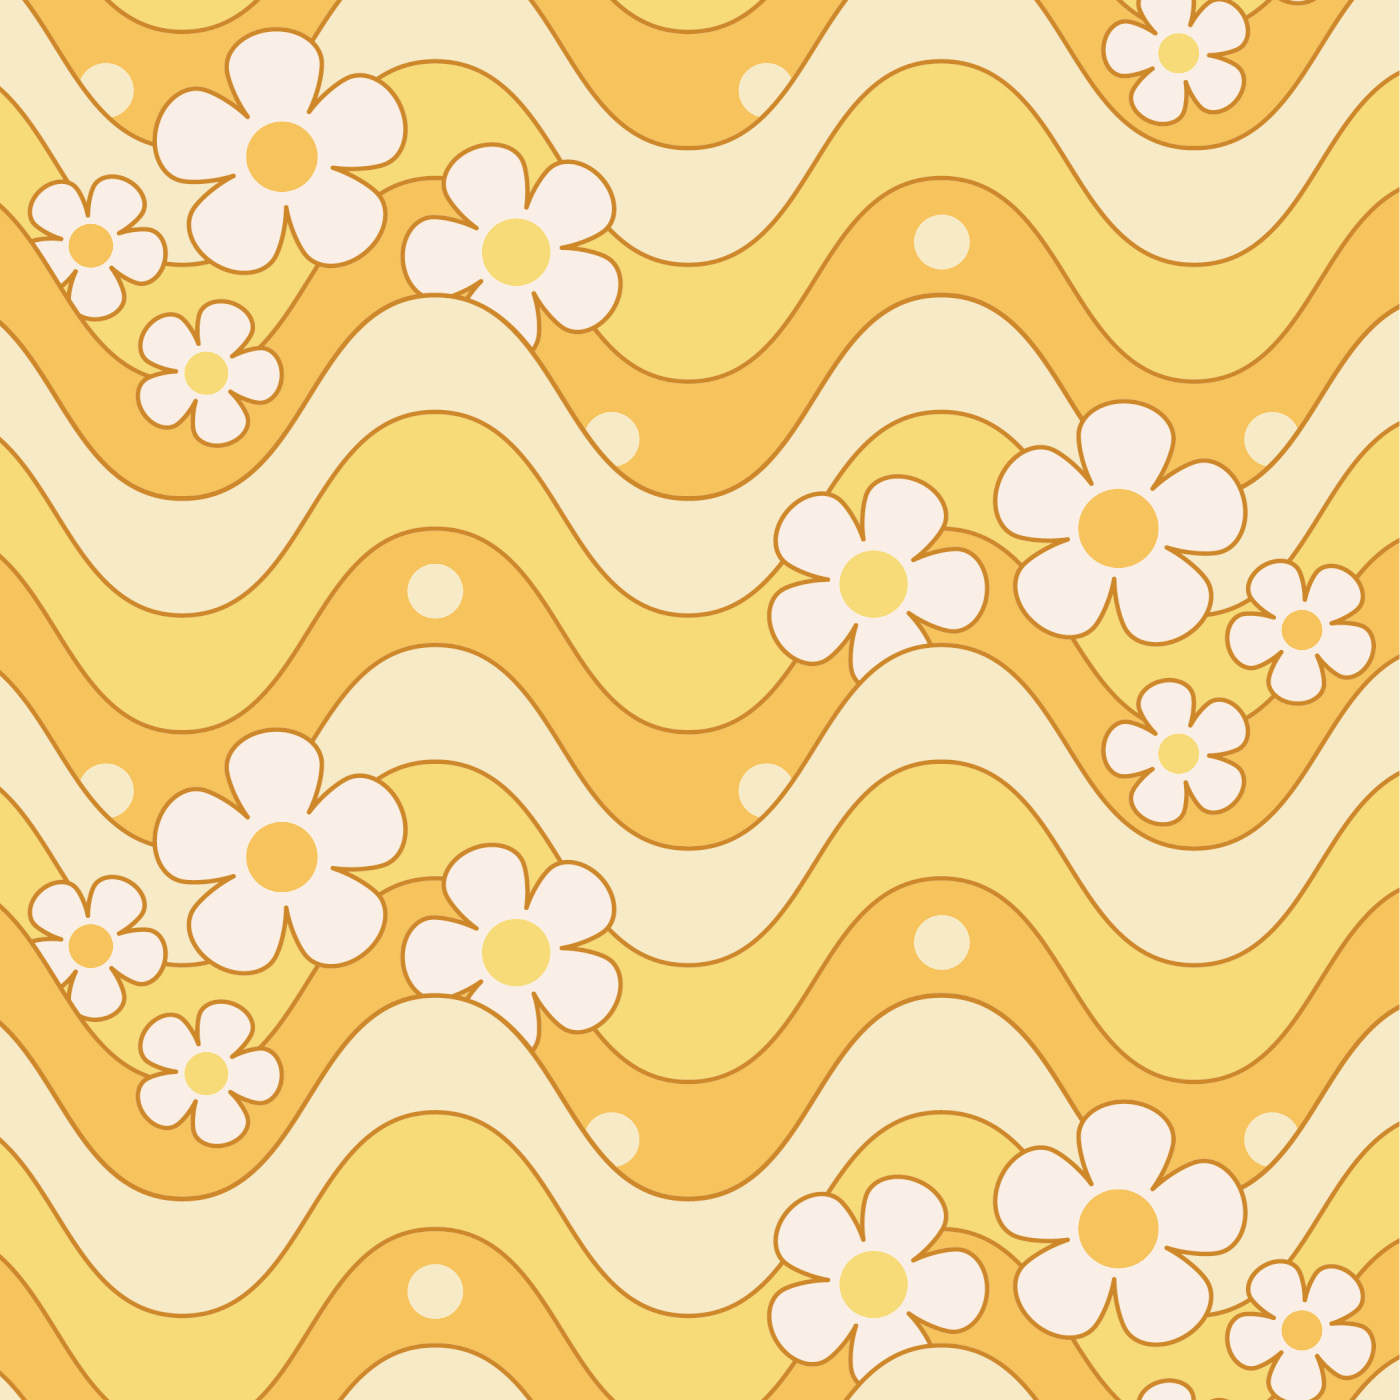 Smiling Daisy Flower Fabric, Wallpaper and Home Decor